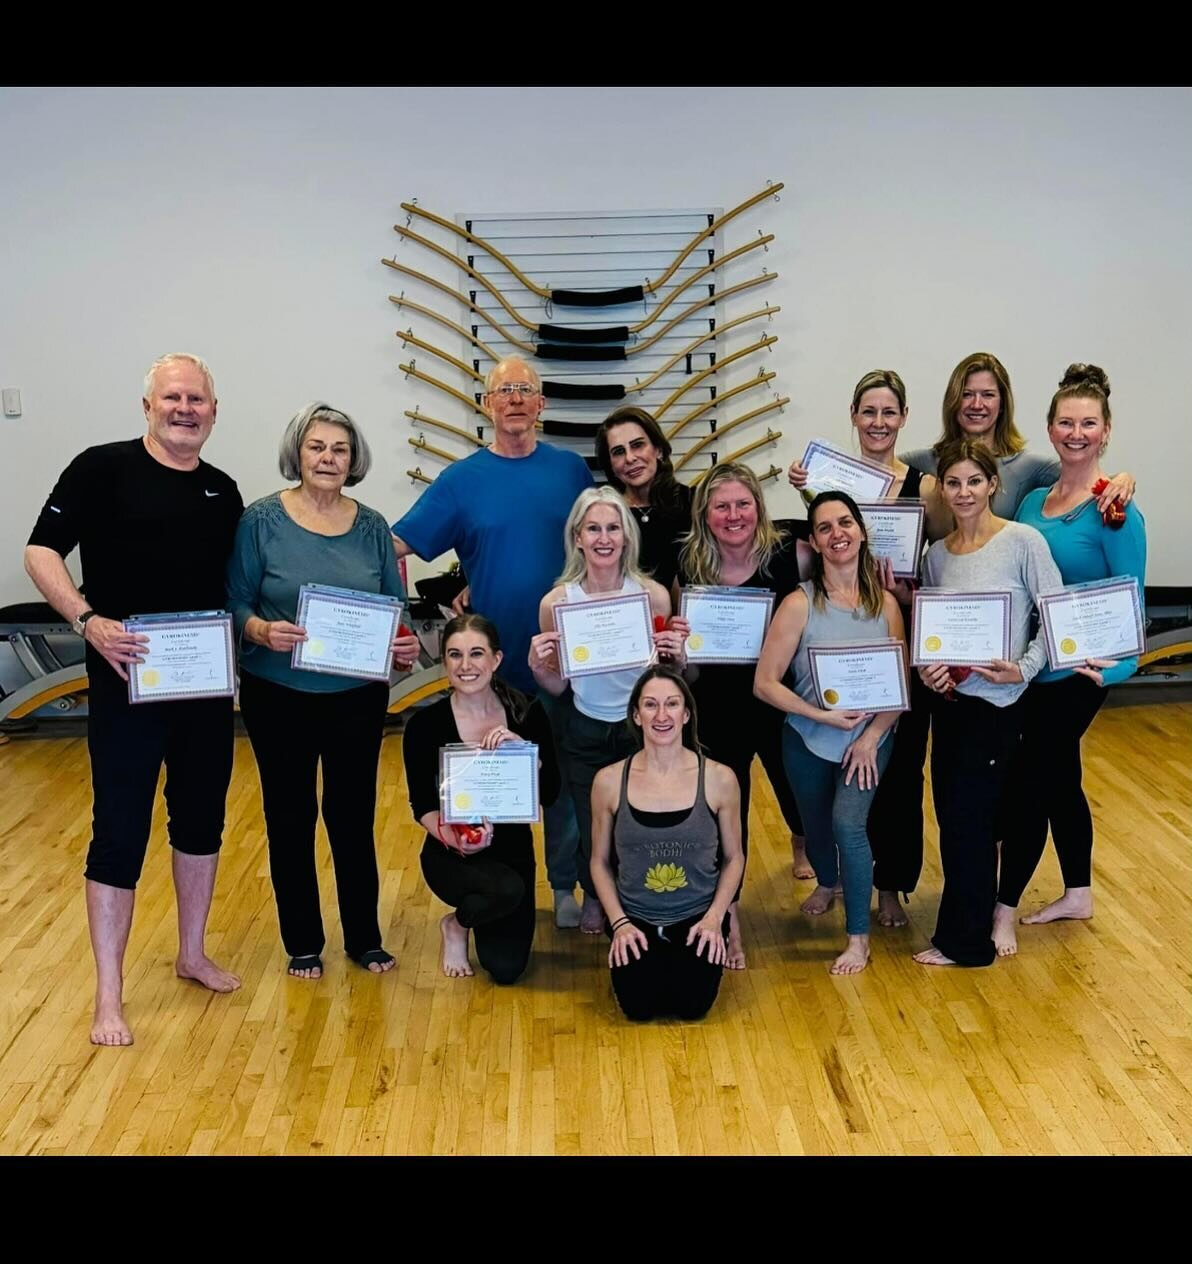 Finally completed my Gyrokinesis certification that I started in 2008. Had to start the process all over but so worth it because I got to spend time with these glorious movers. Big thanks and gratitude to Master Trainer Jen ! @gyrotonicbodhiboulderco